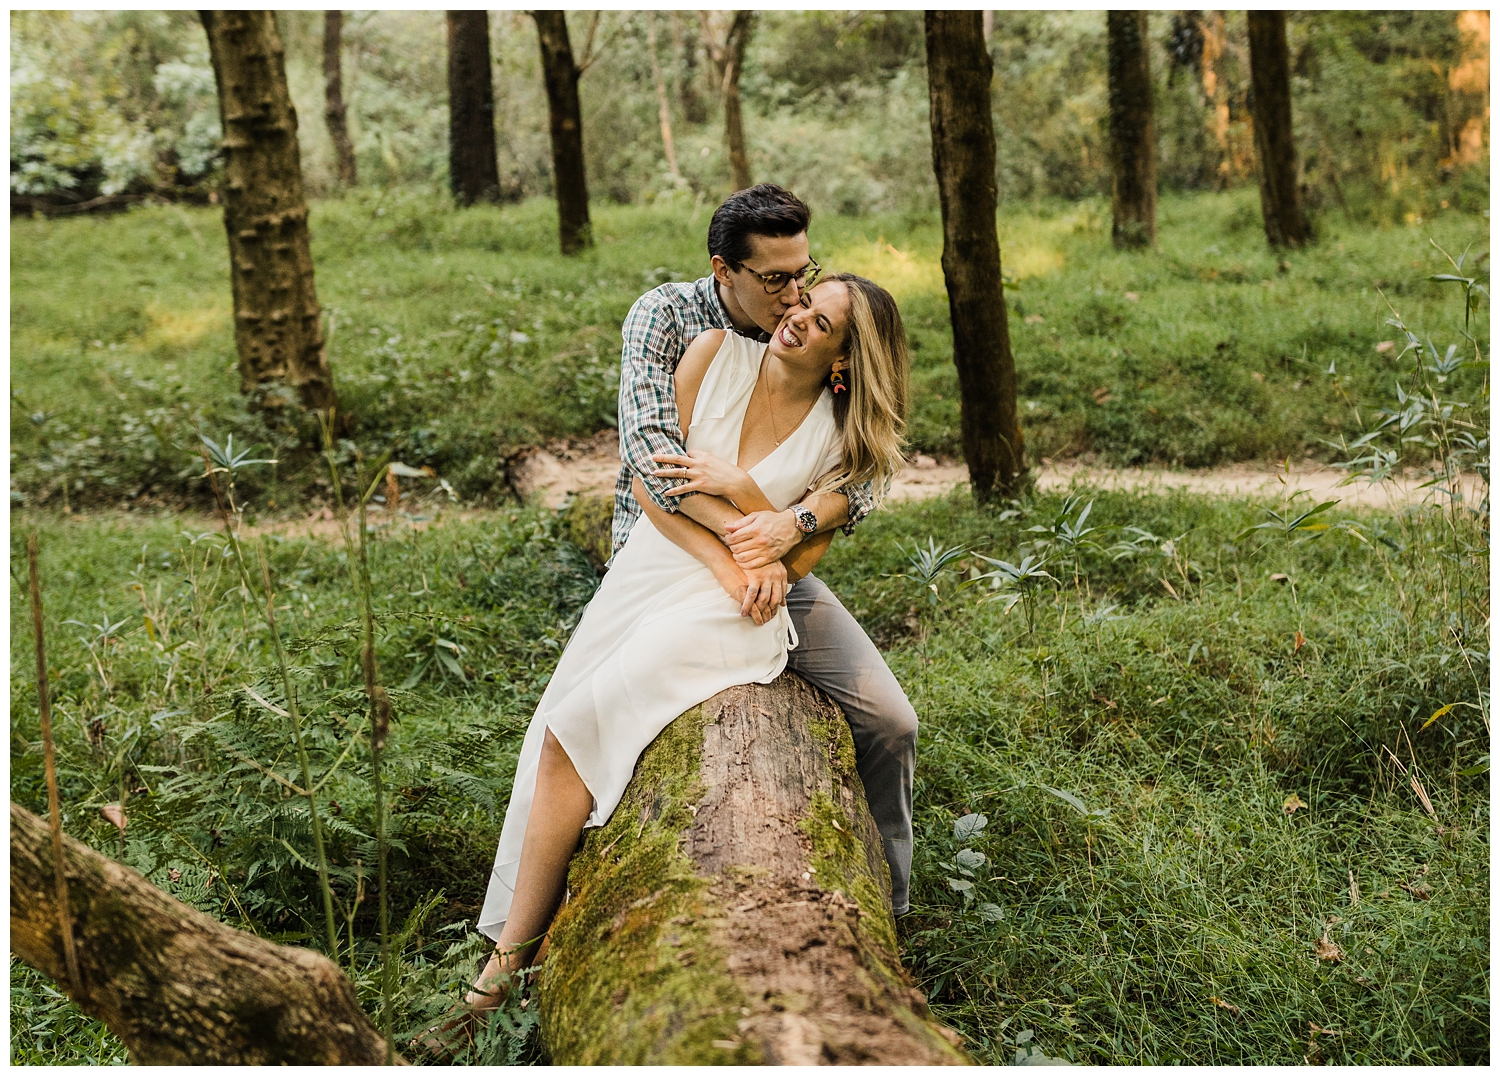 Lullwater Park couple kissing and giggling on a log during an engagement session in a lush, green forest in Atlanta, GA